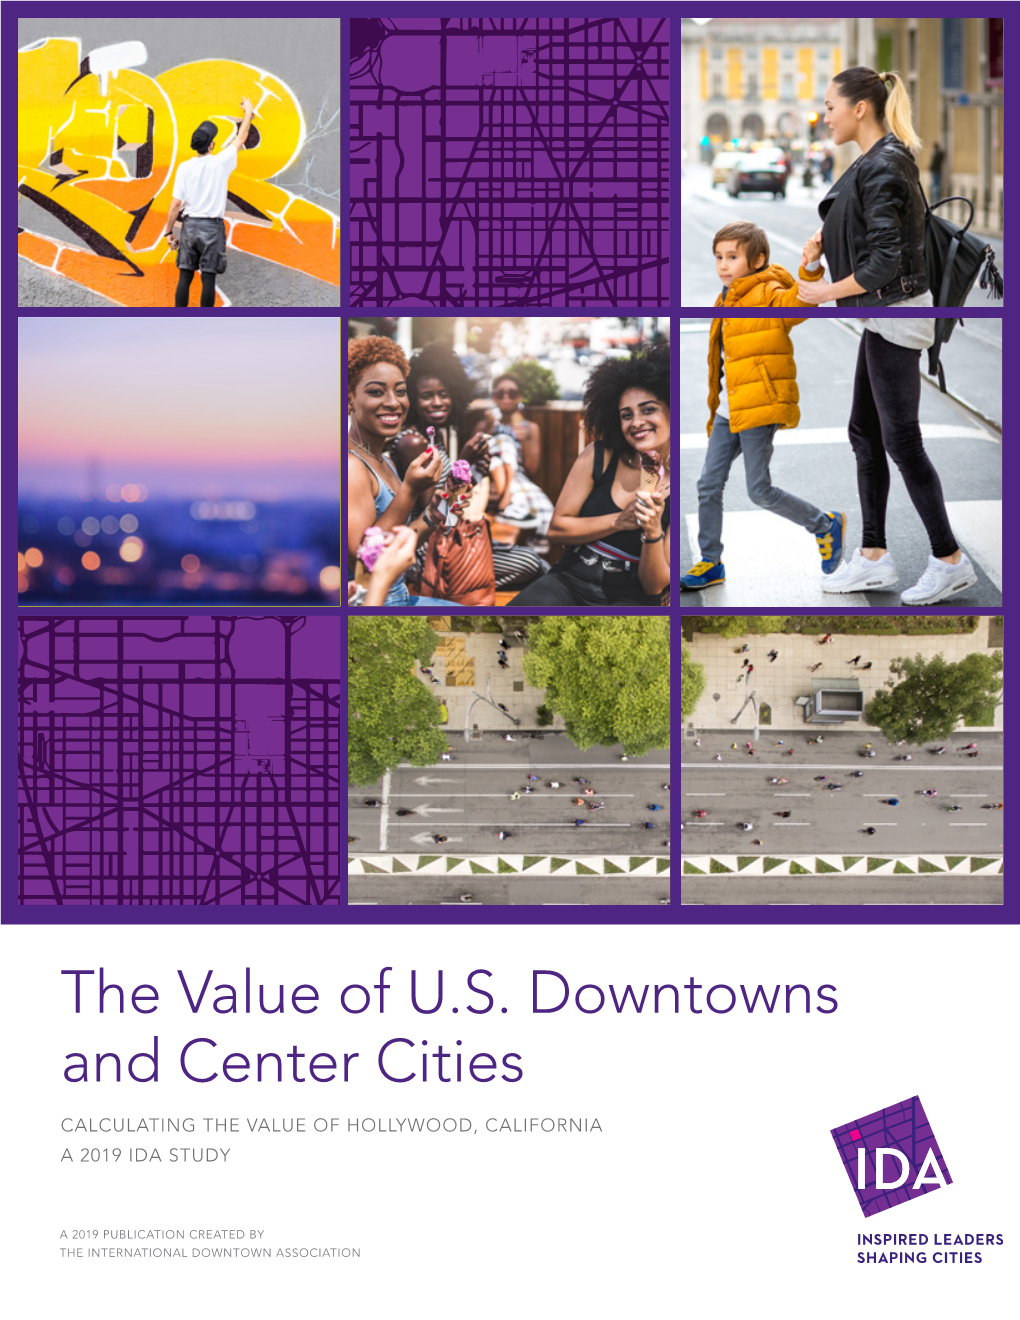 The Value of U.S. Downtowns and Center Cities